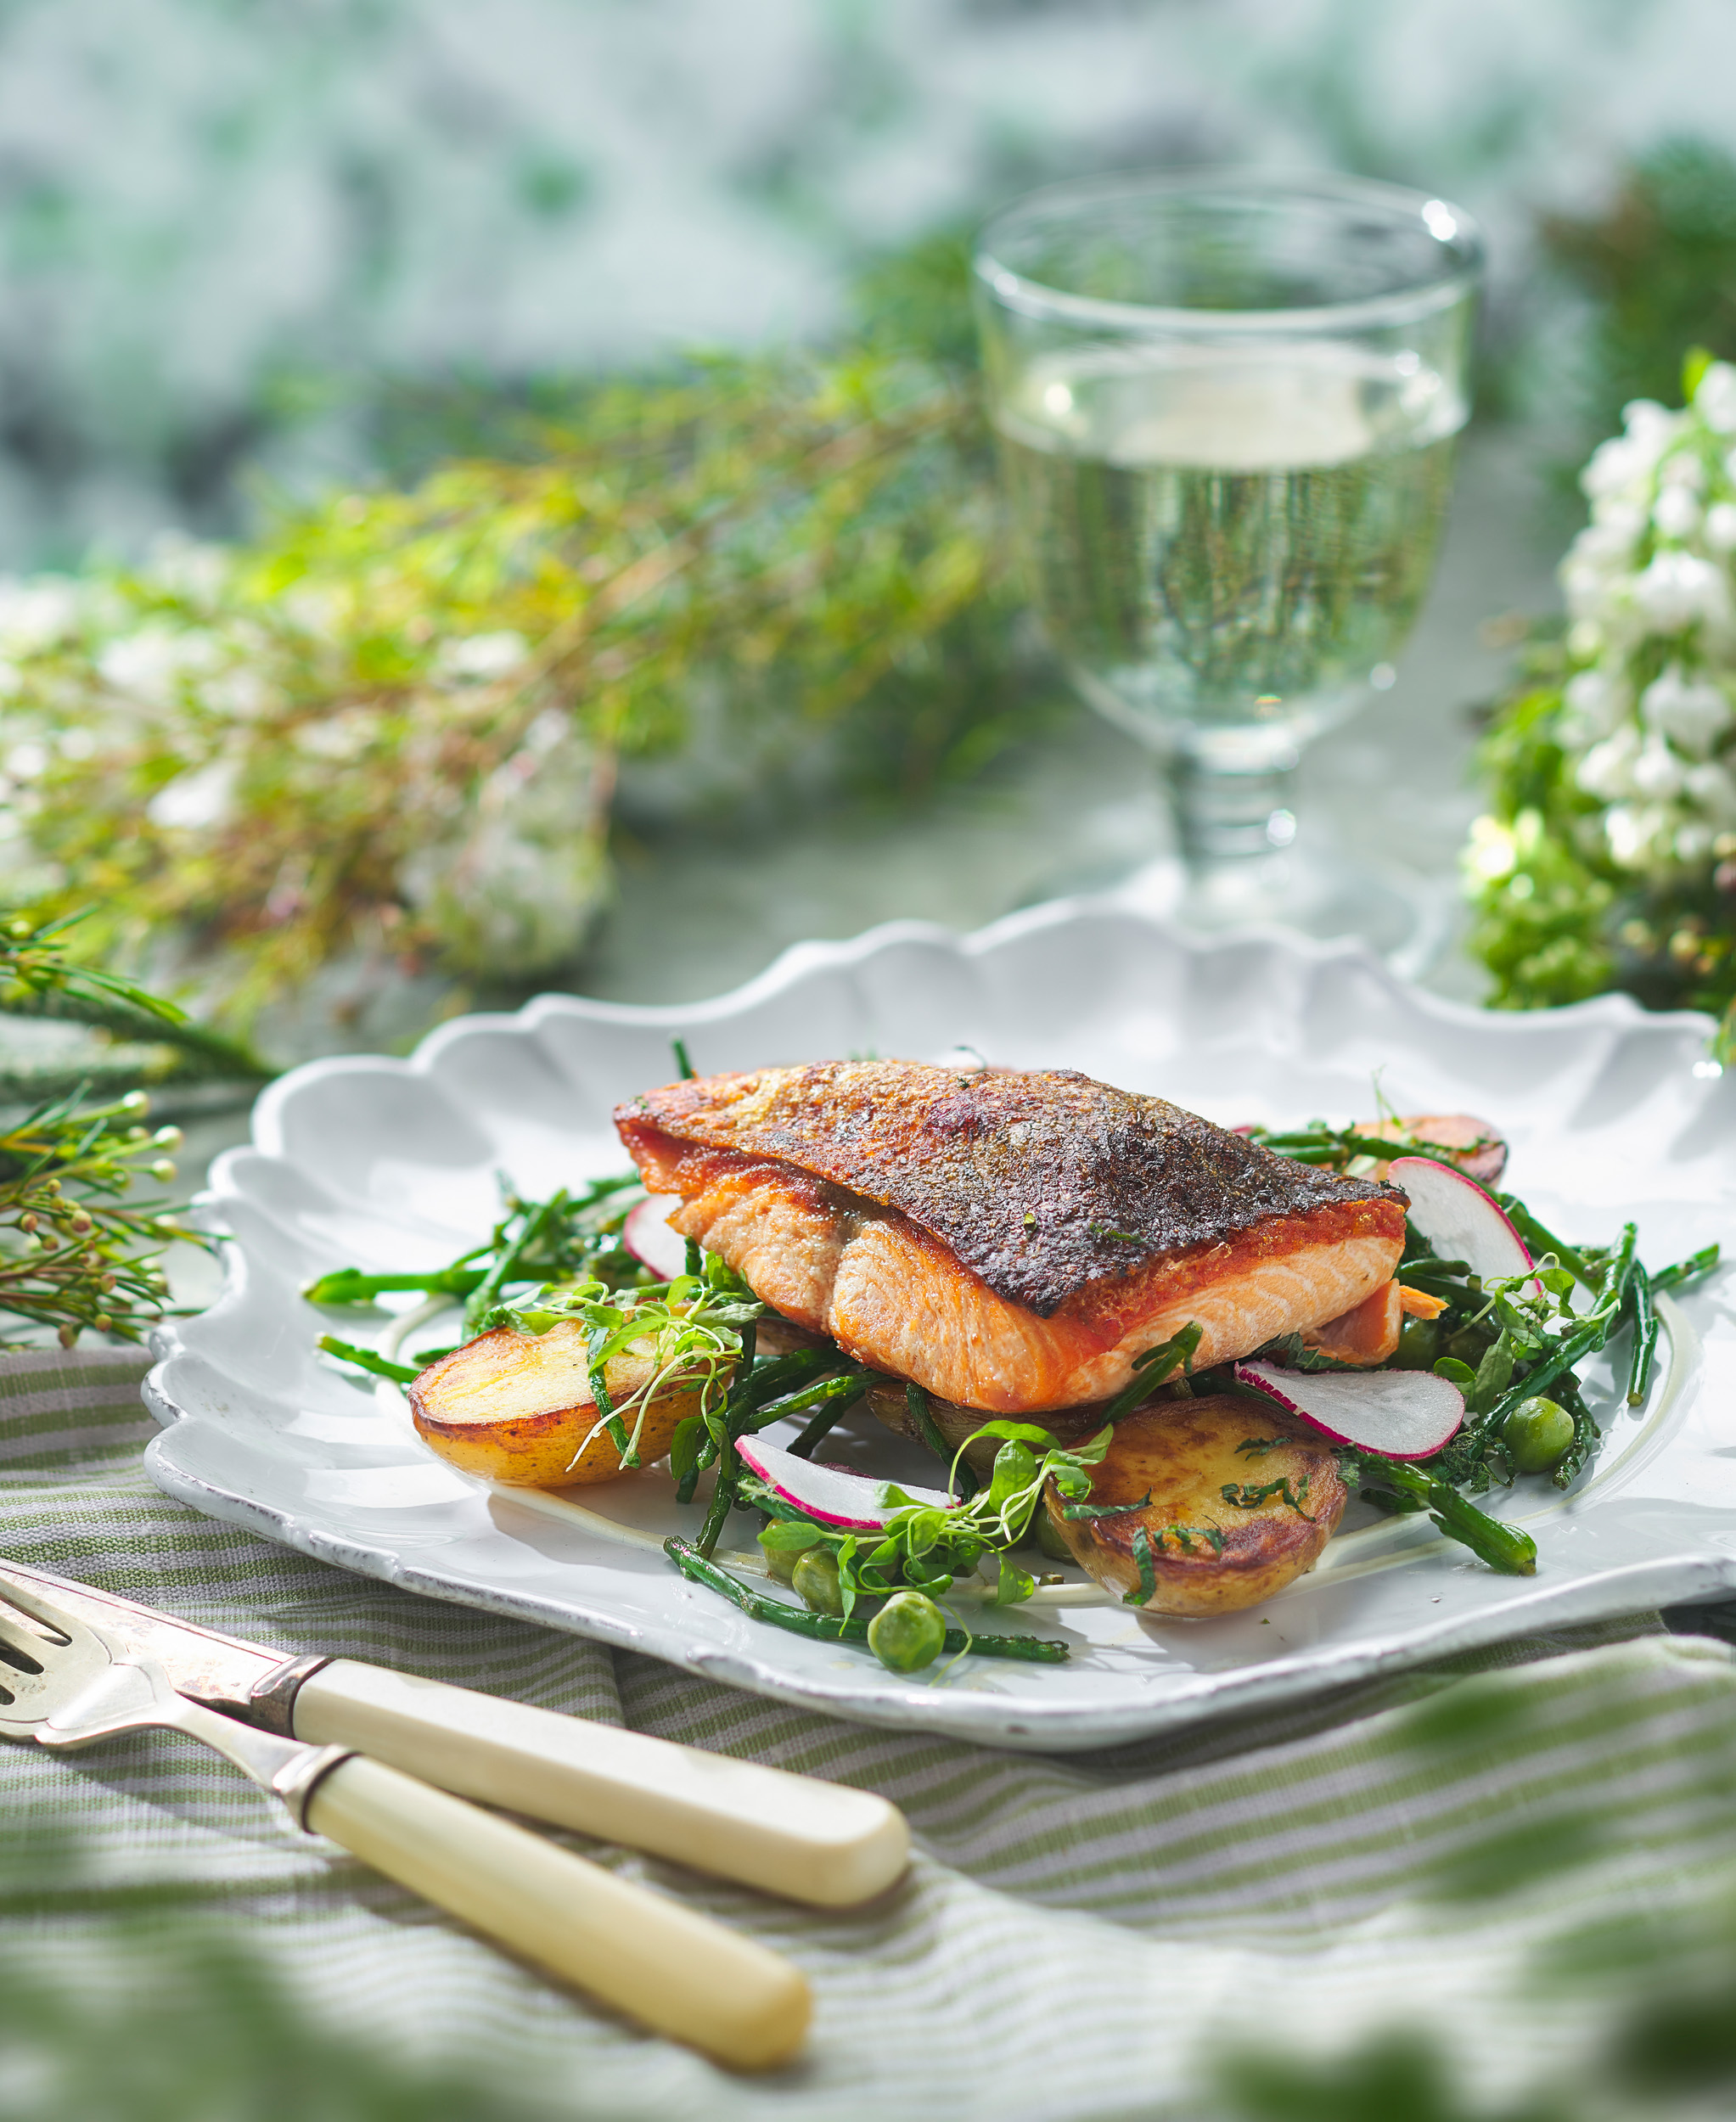 https://www.drakeandmorgan.co.uk/the-otherist/wp-content/uploads/2022/05/Seafood-Trout-3.jpg